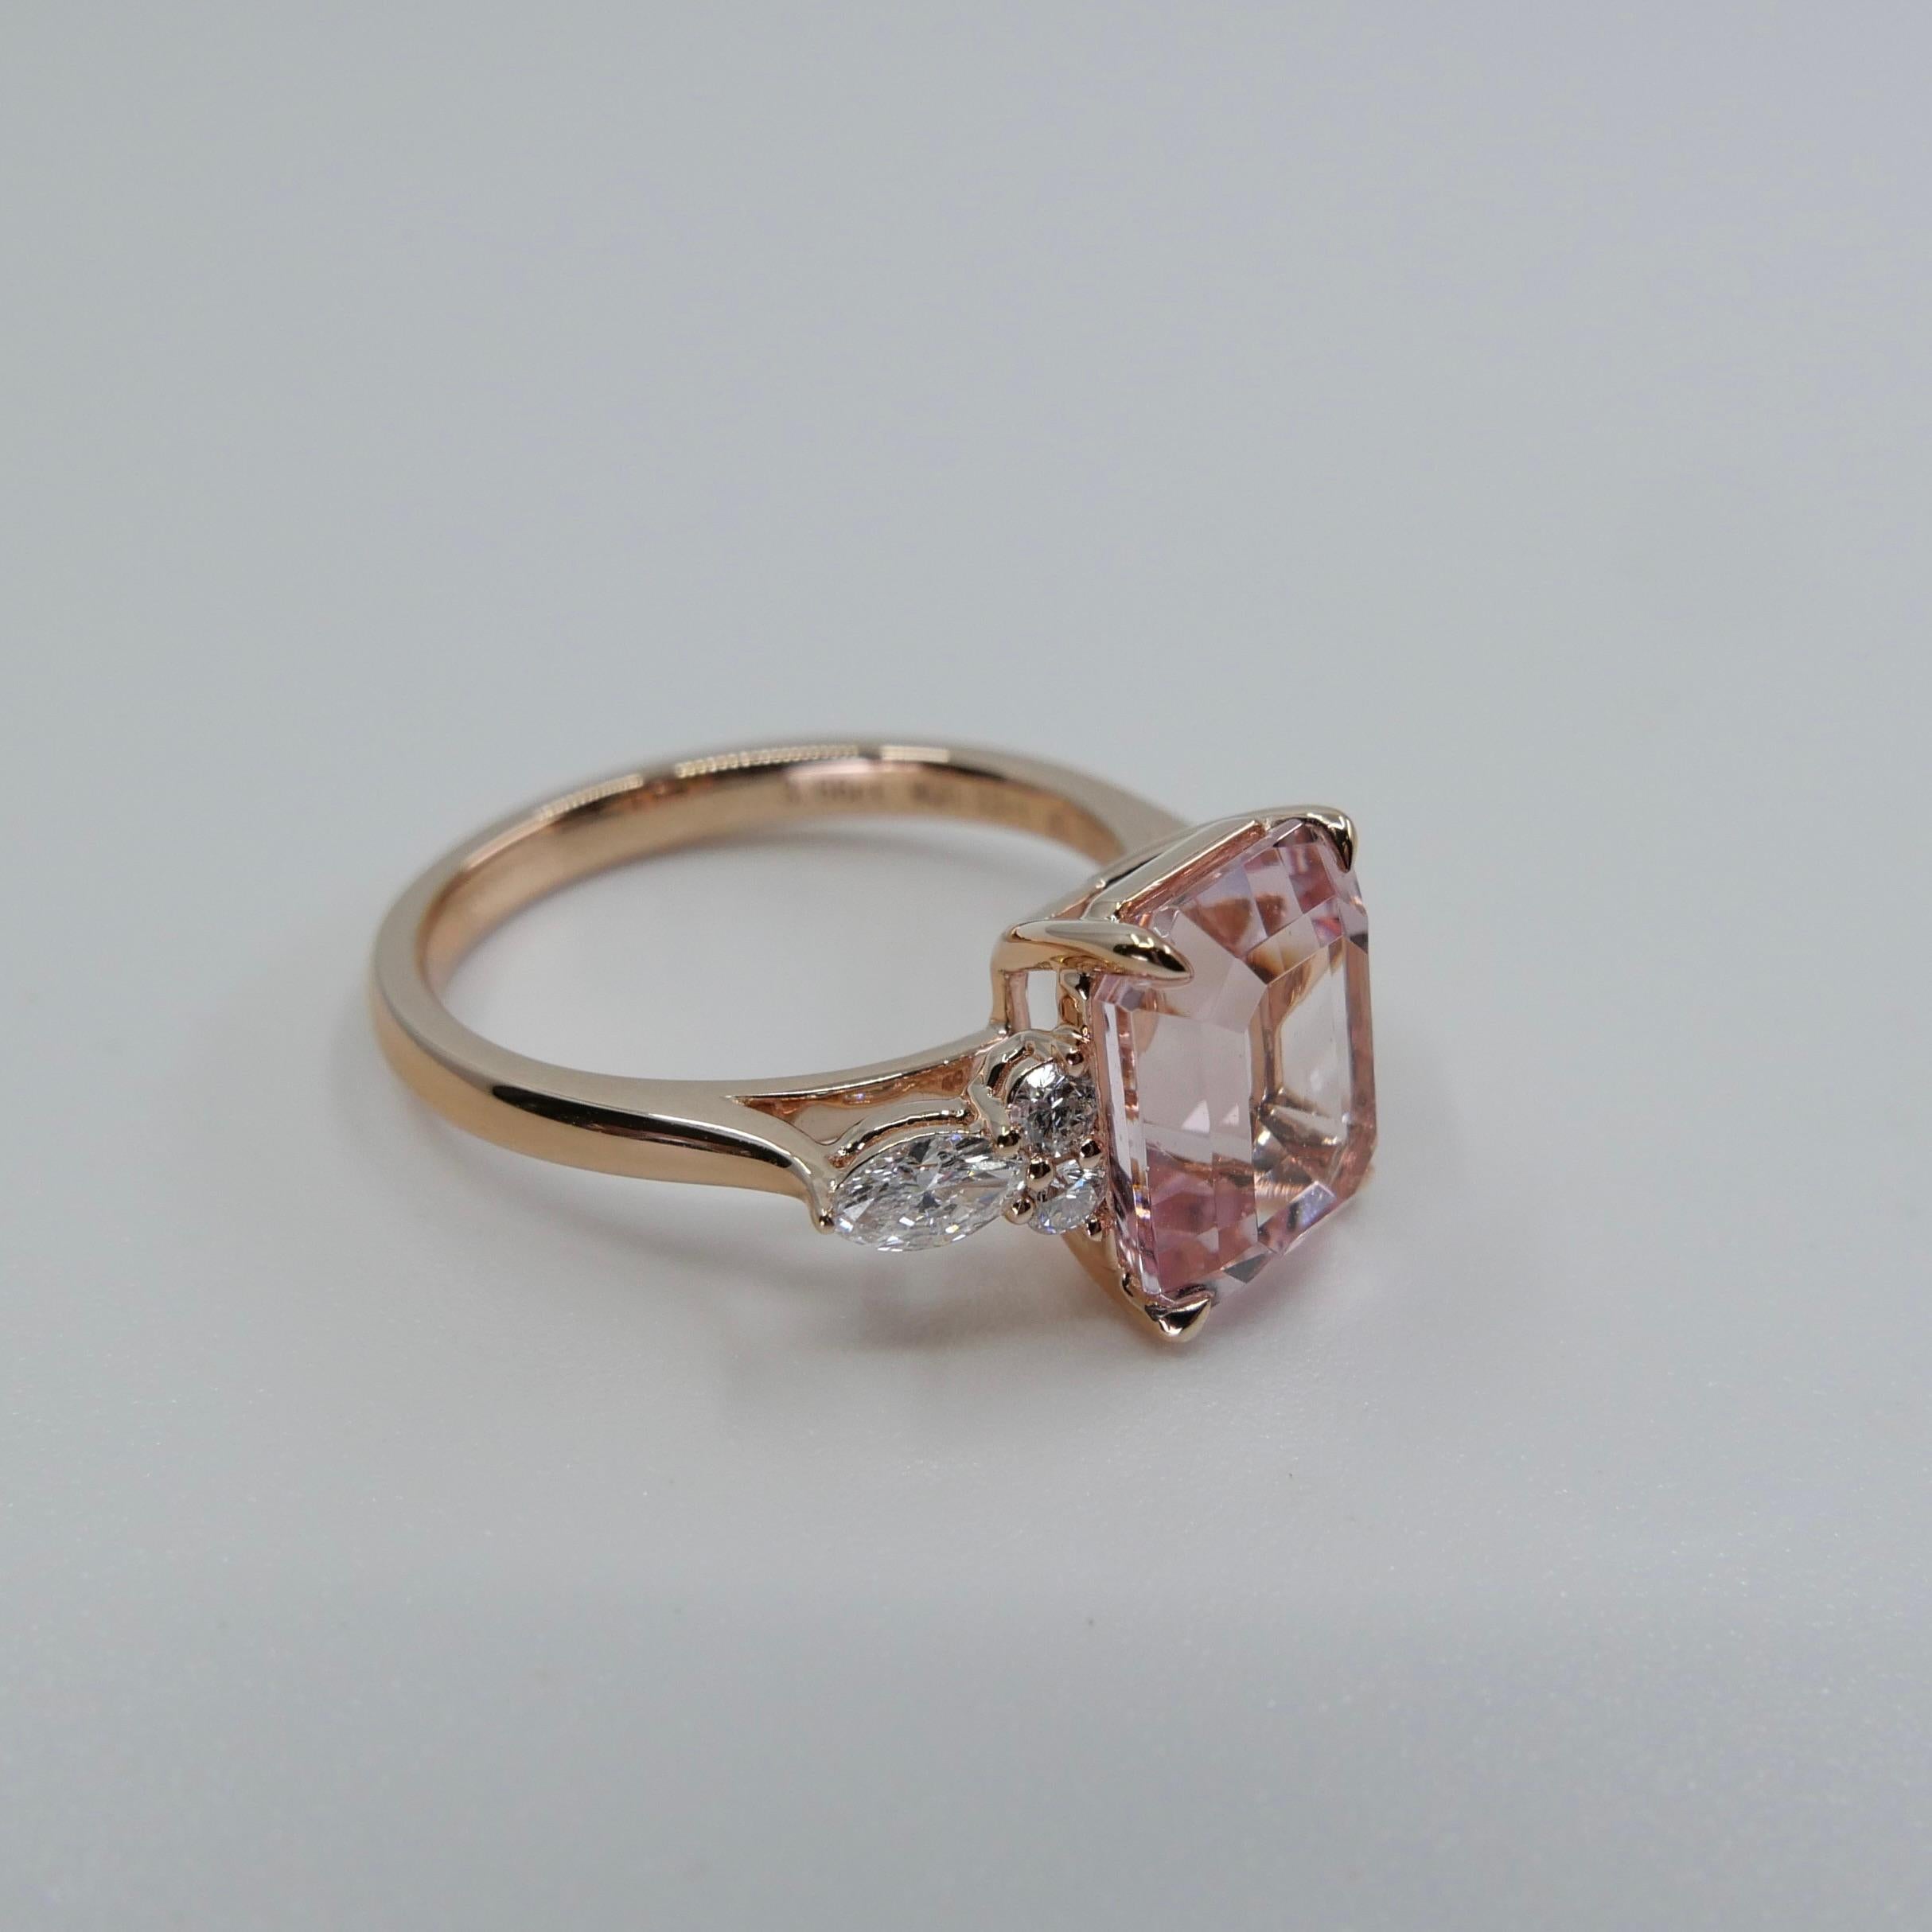 Women's 3.66 Cts Peach Pink Morganite & Diamond Cocktail Ring. Stunning!  For Sale